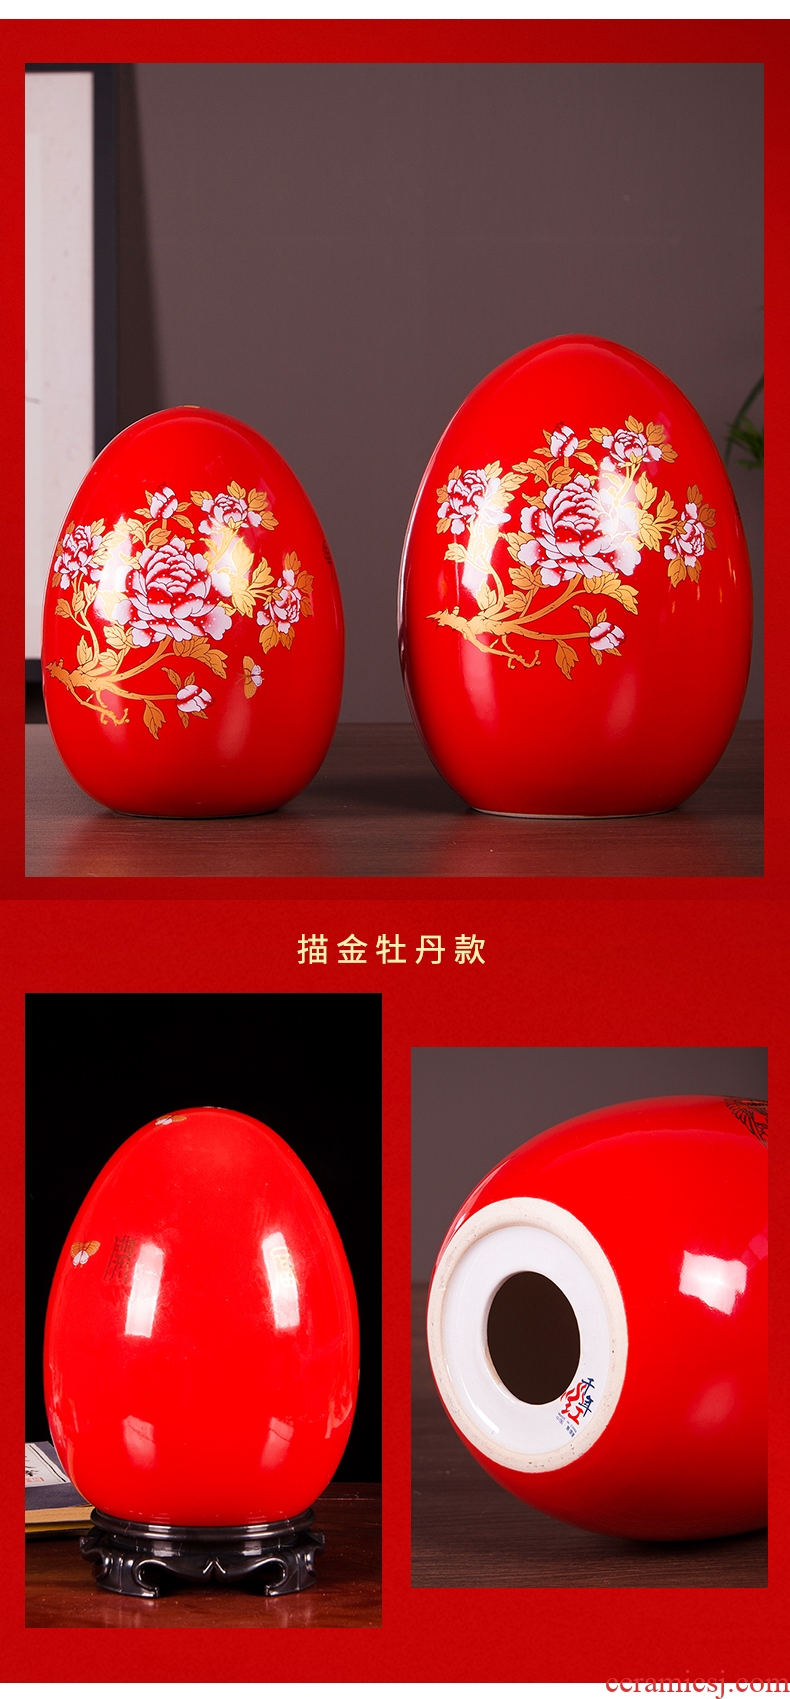 Jingdezhen ceramic Chinese red f an egg is placed a thriving business new home sitting room ark adornment household decoration